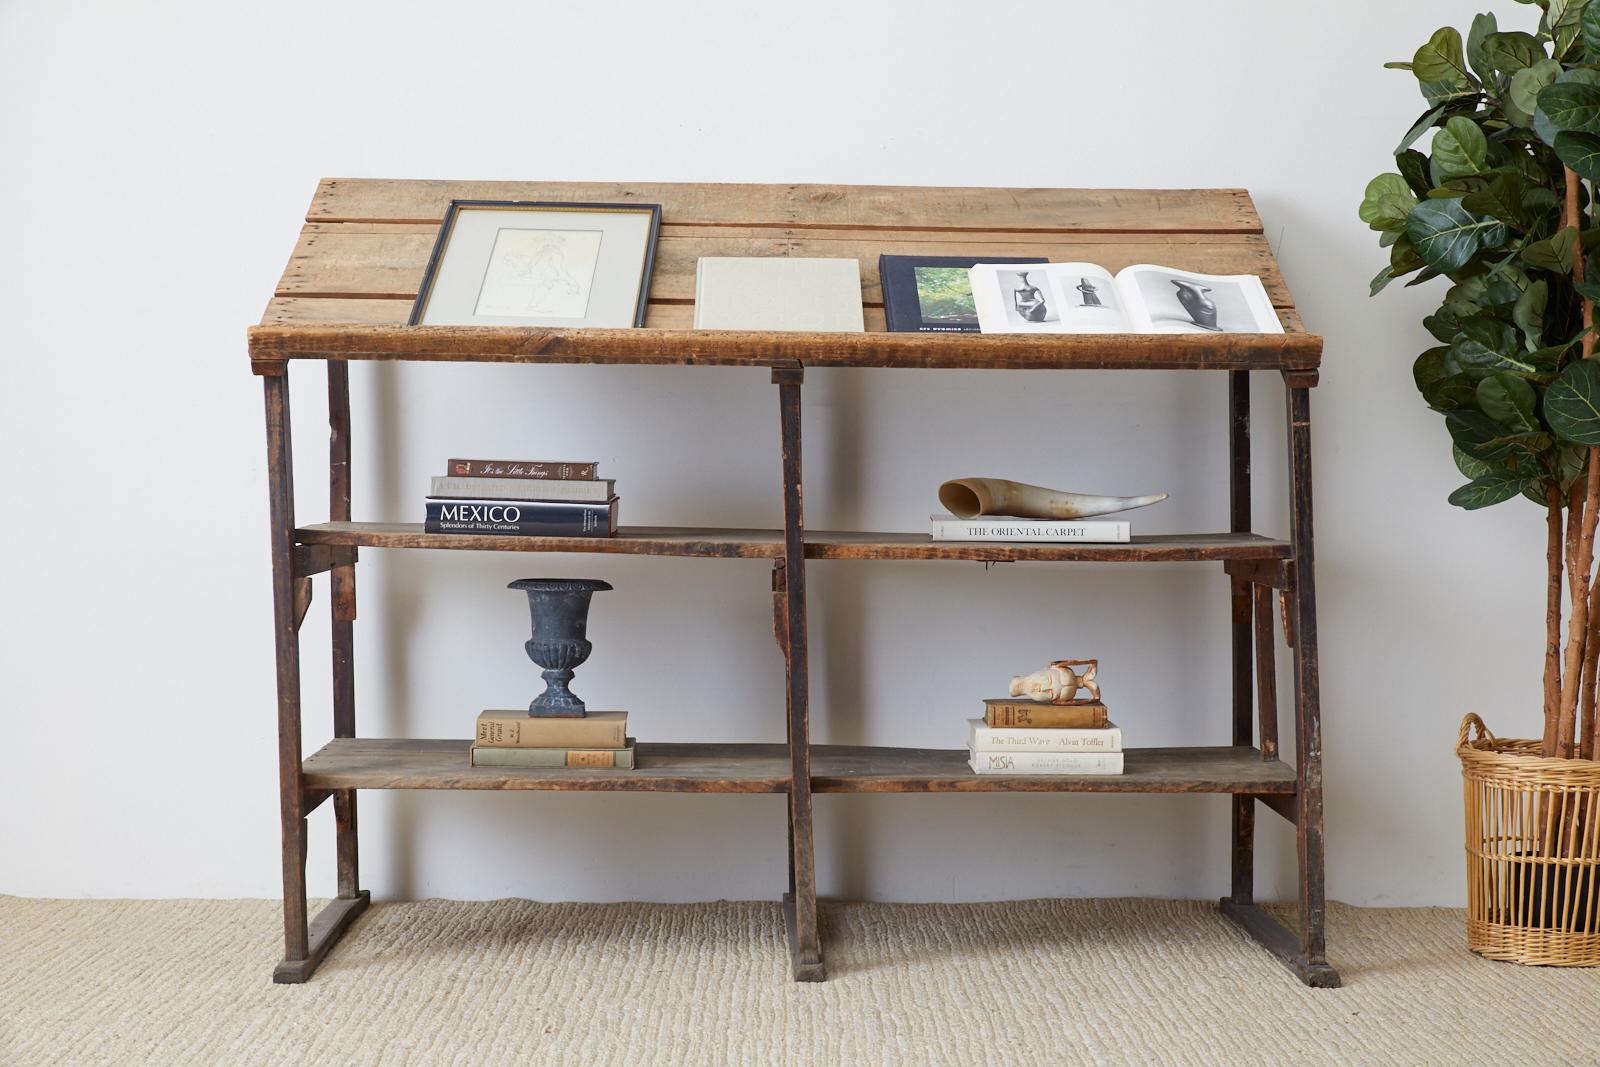 Large early 20th century American rustic three shelf display or étagère. Constructed from weathered pine barnwood with a lovely distressed patina. The open frame holds three shelves with the top set at an angle having a lip on the bottom. Perfect